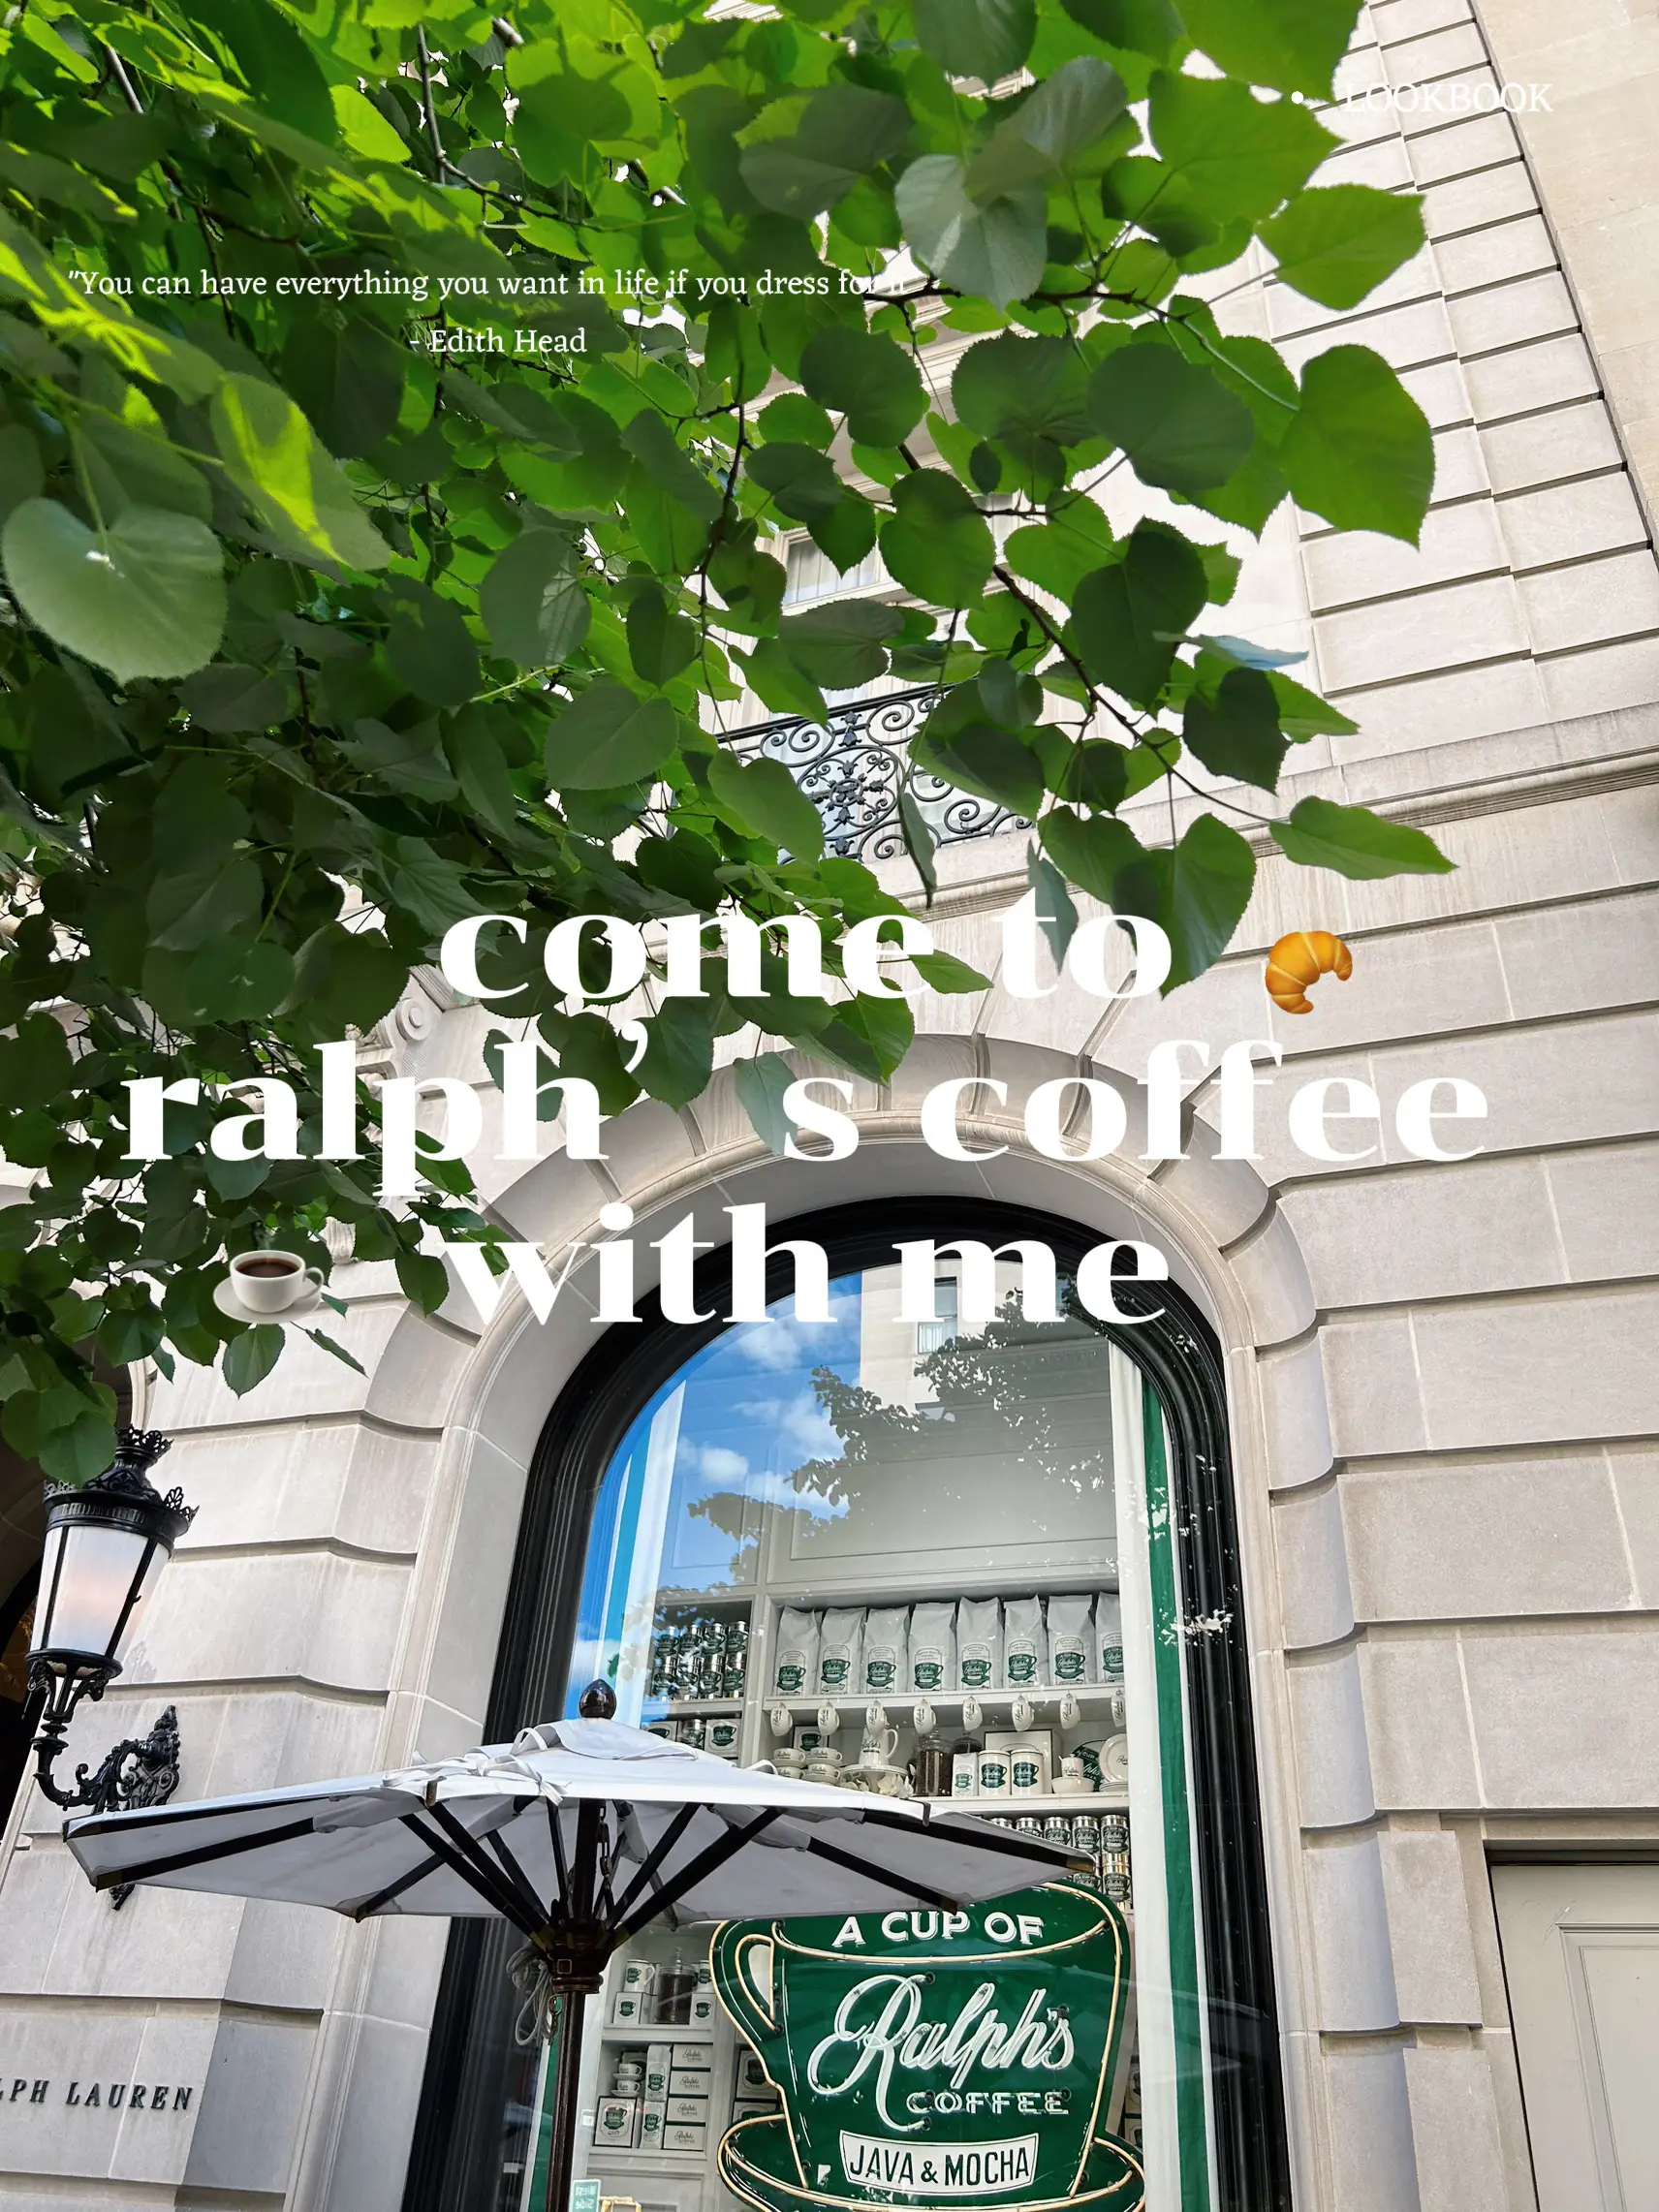 come to ralph’s coffee with me 's images